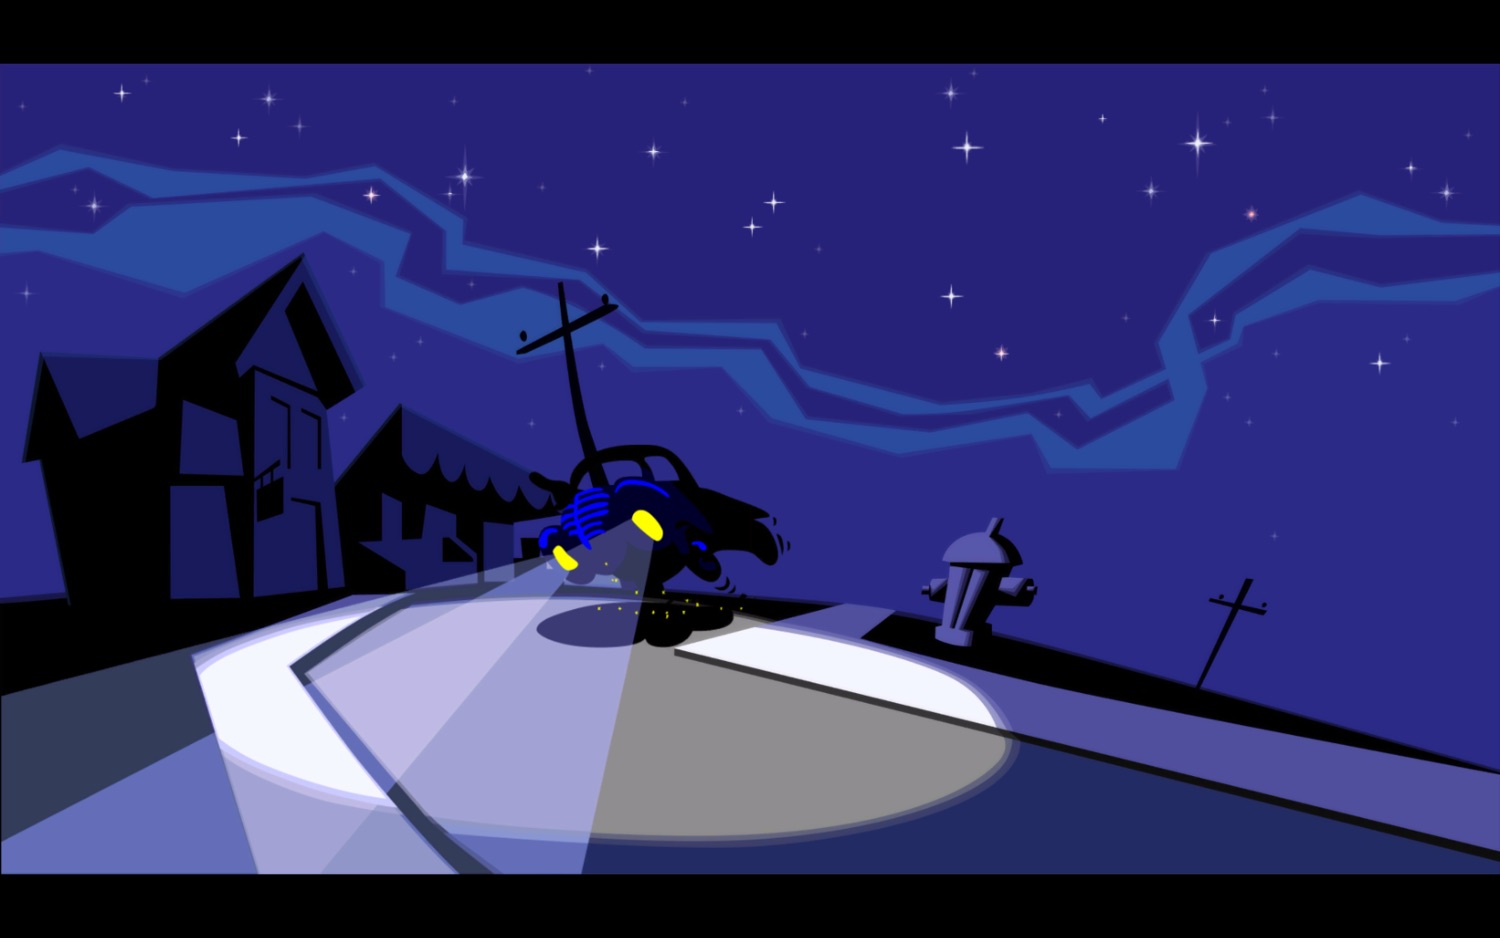 Screenshot from Day of the Tentacle showing a car with blazing headlines screeching around a corner at night. There are two houses in the back, and the car is turning around a fire hydrants.